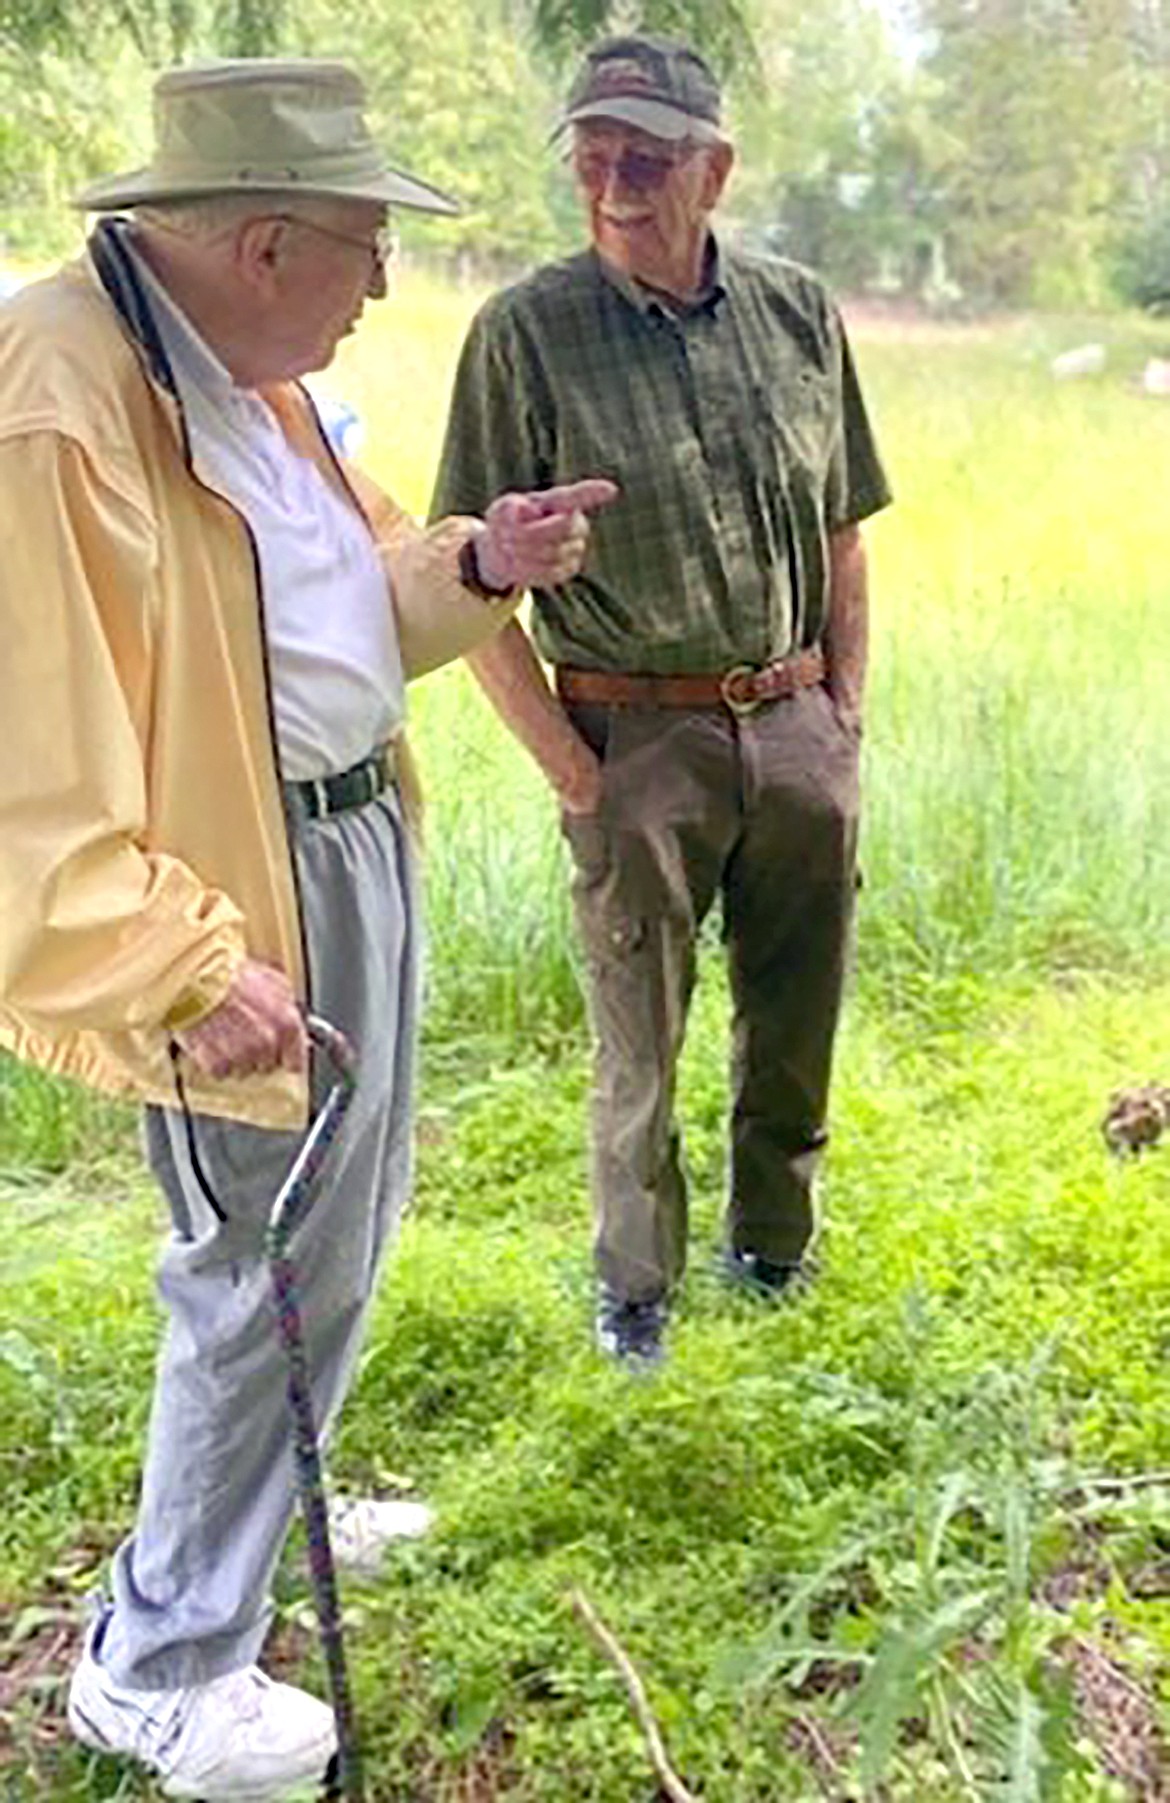 Gary Pietsch and Fritz Holz reminisce on good times on the Pine Street Hill during a visit to the sled hill property in the spring 2022.